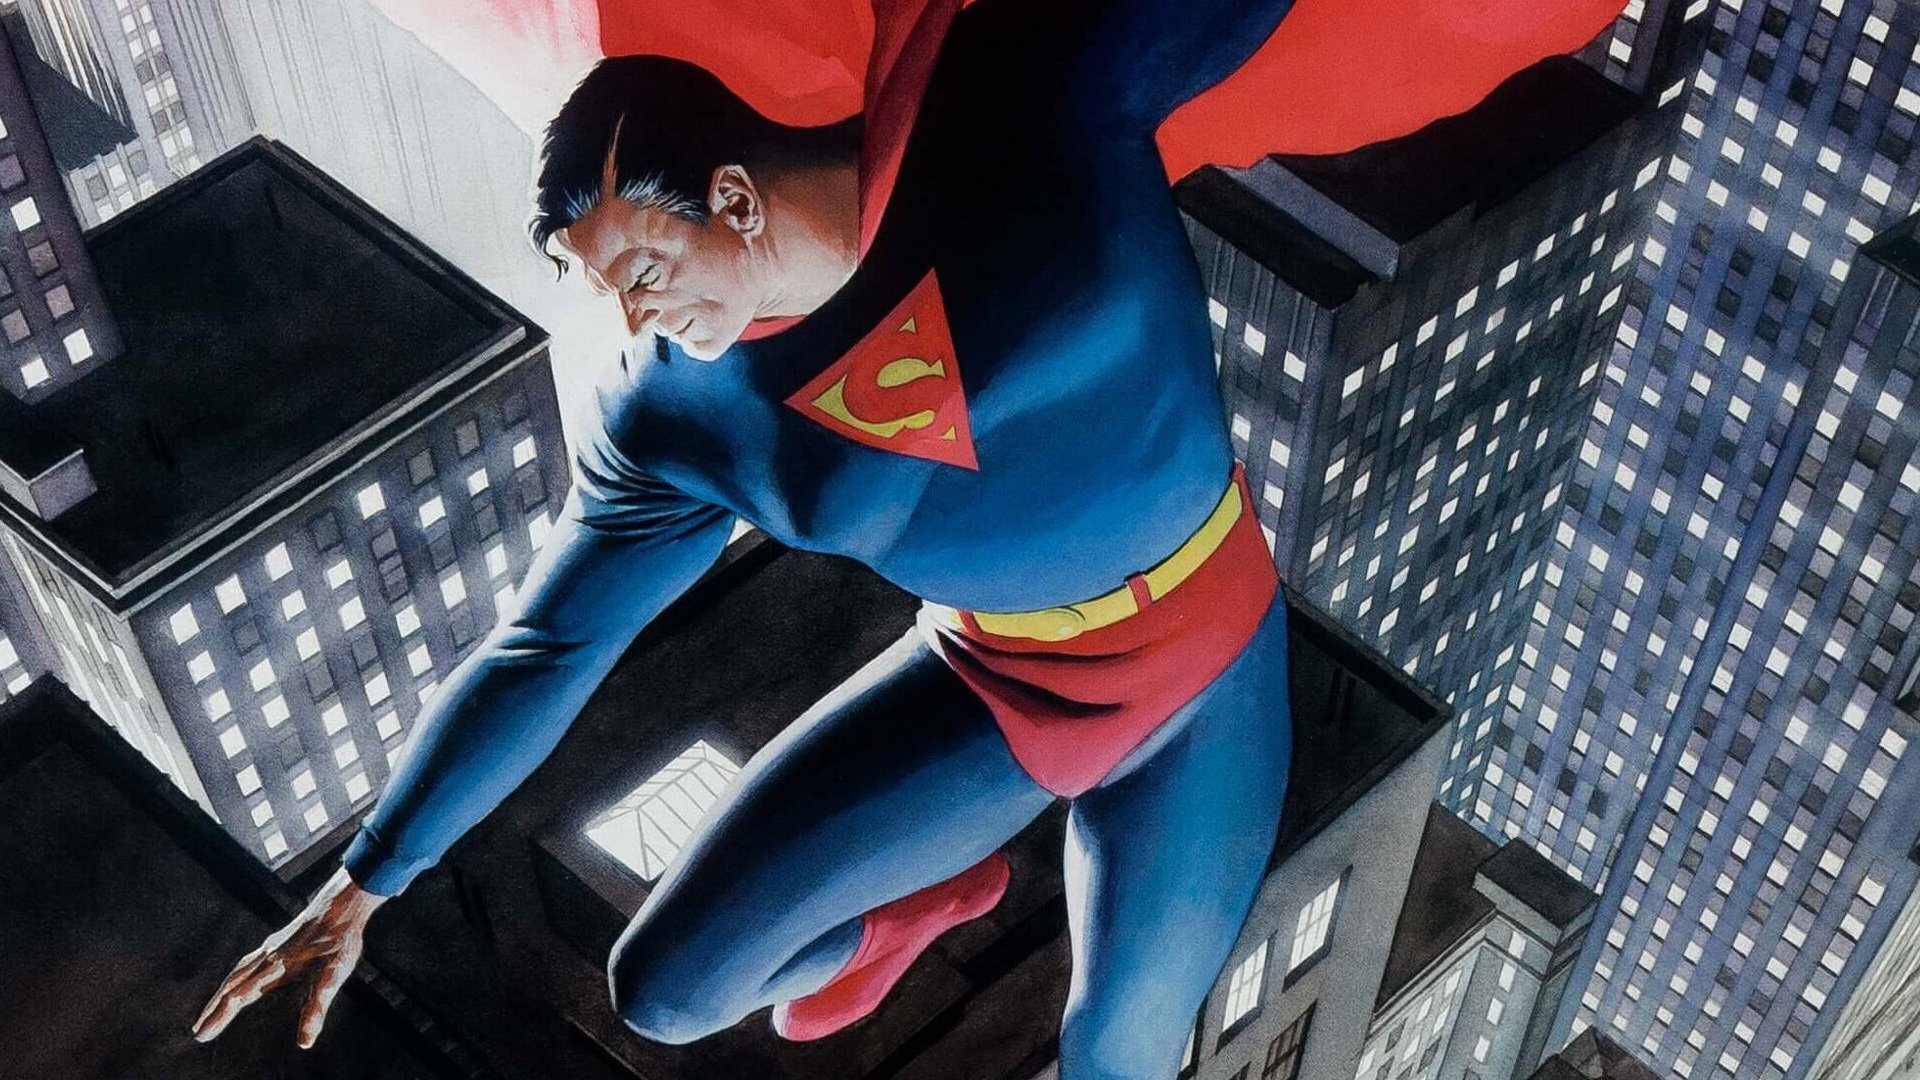 Superman: A Complete Timeline of Henry Cavill's Run With the Character